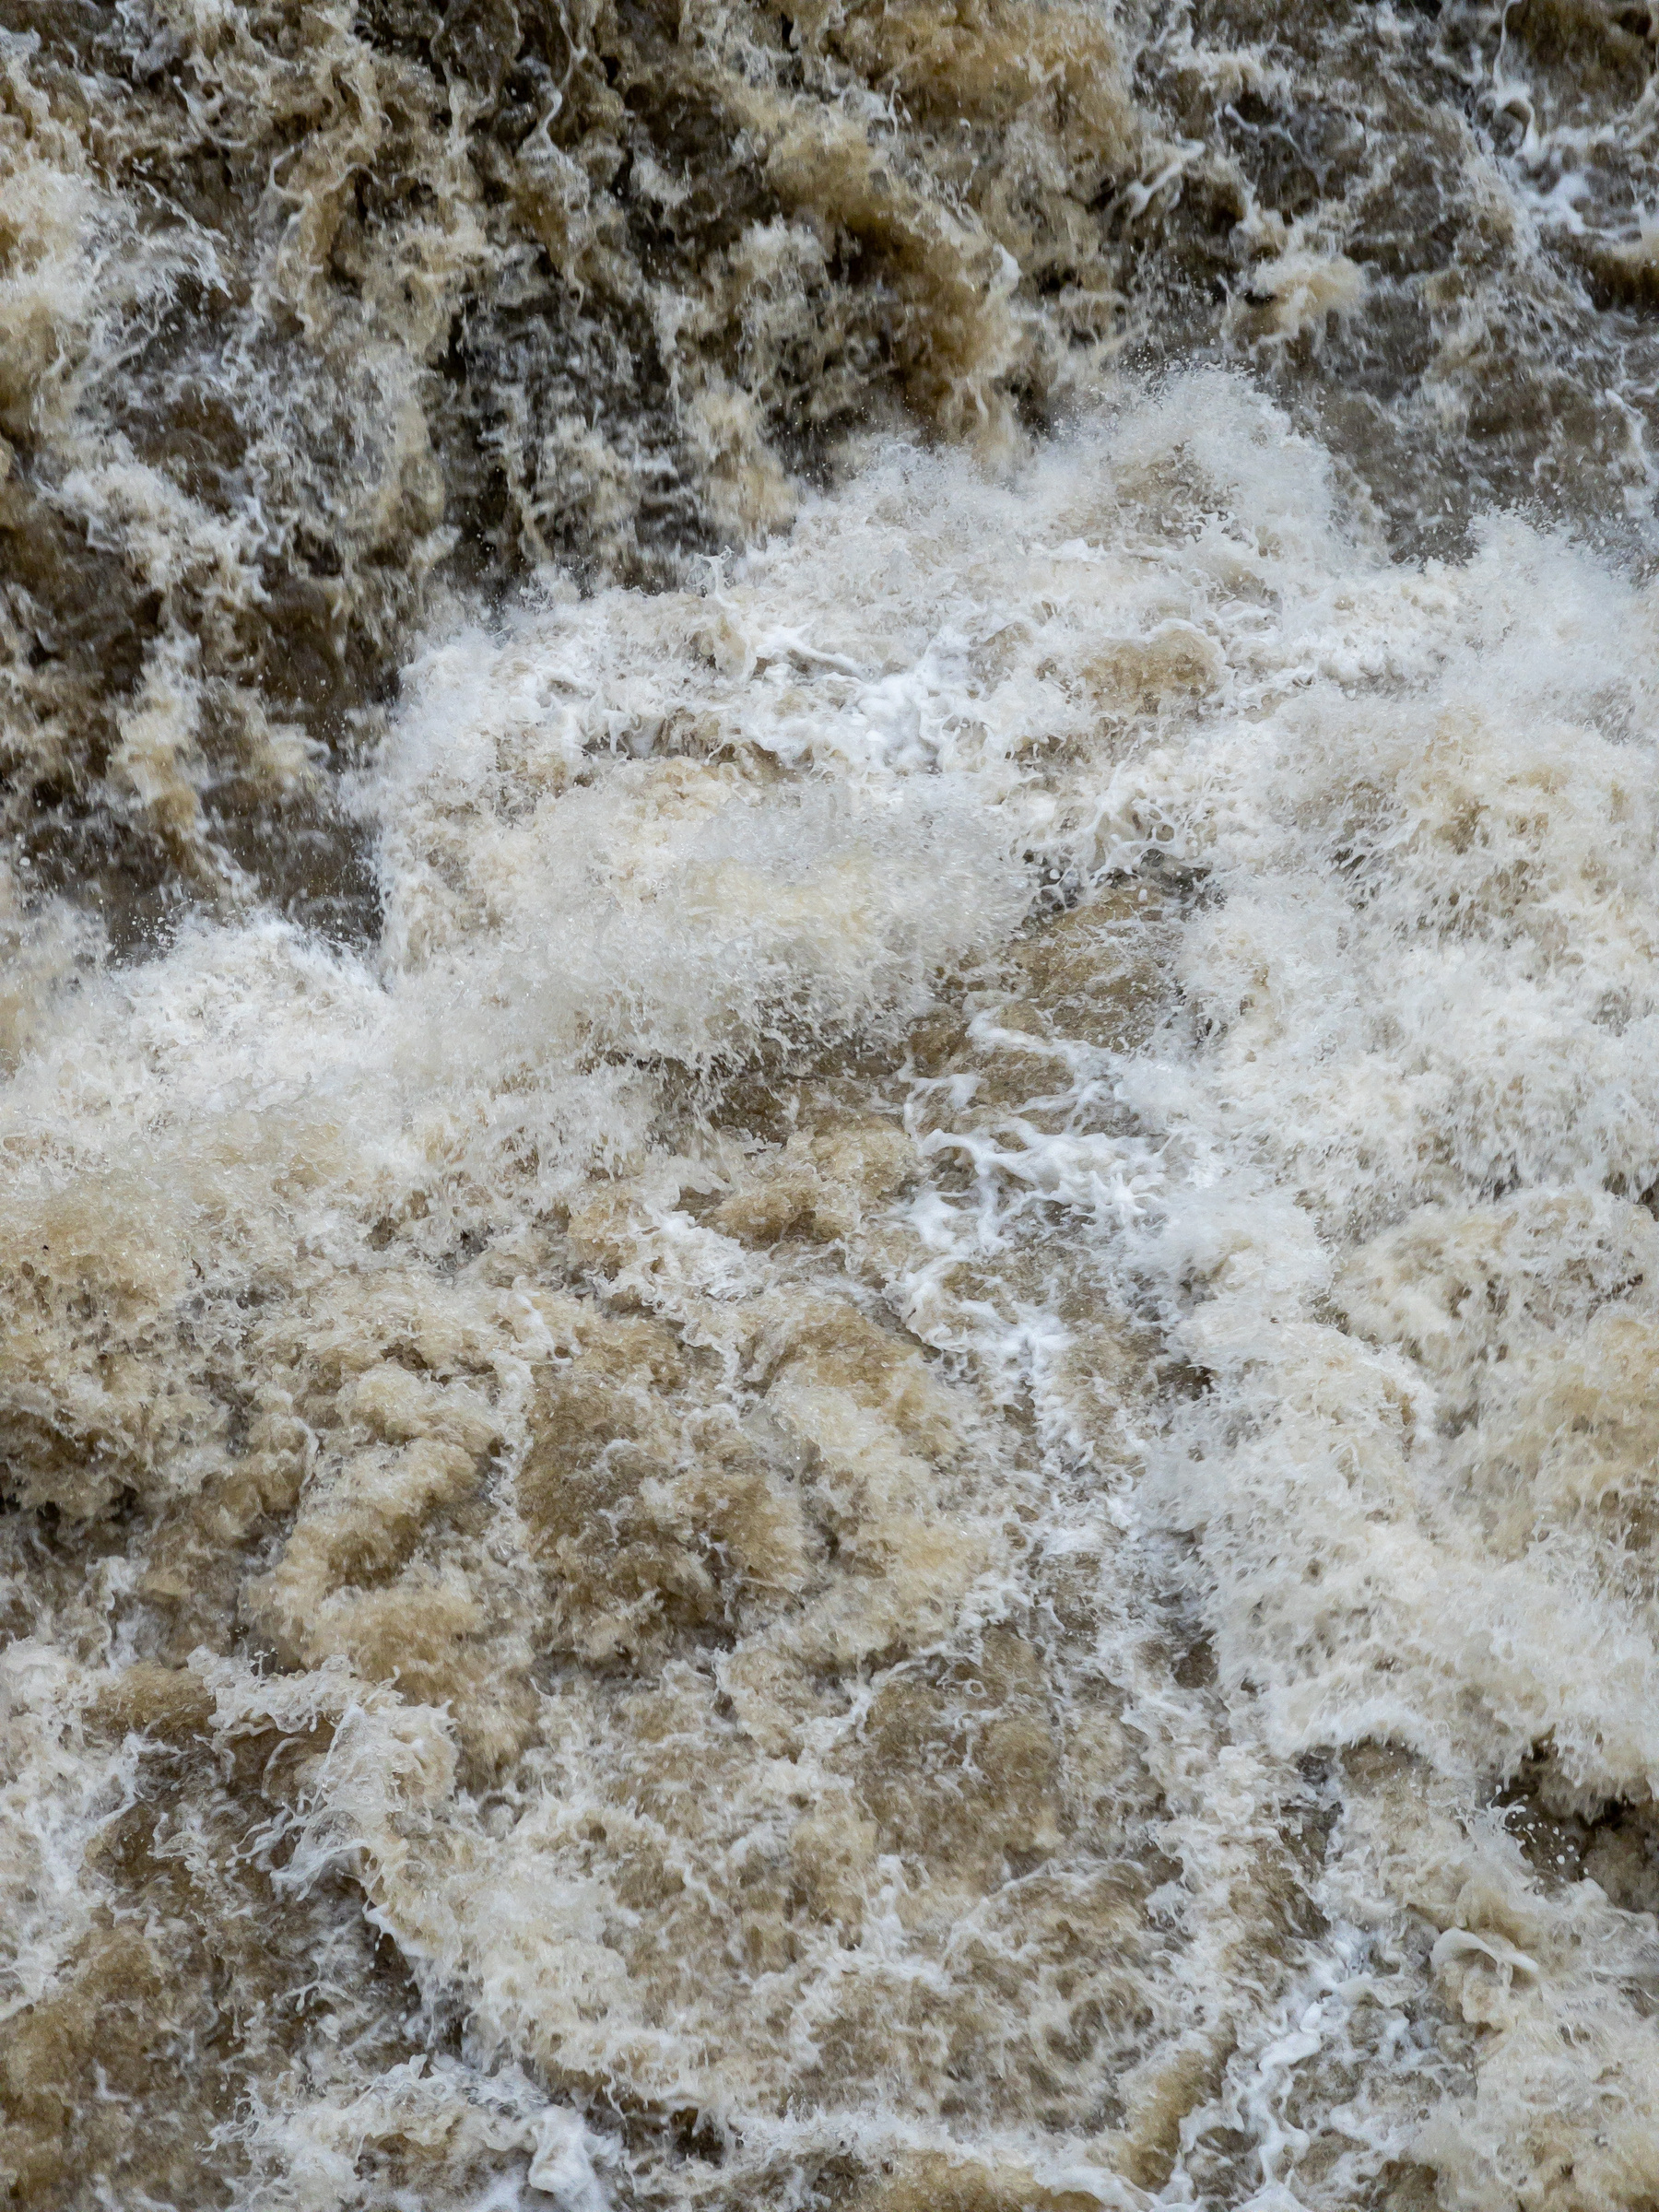 Closeup of churning rapids after heavy rainfall.